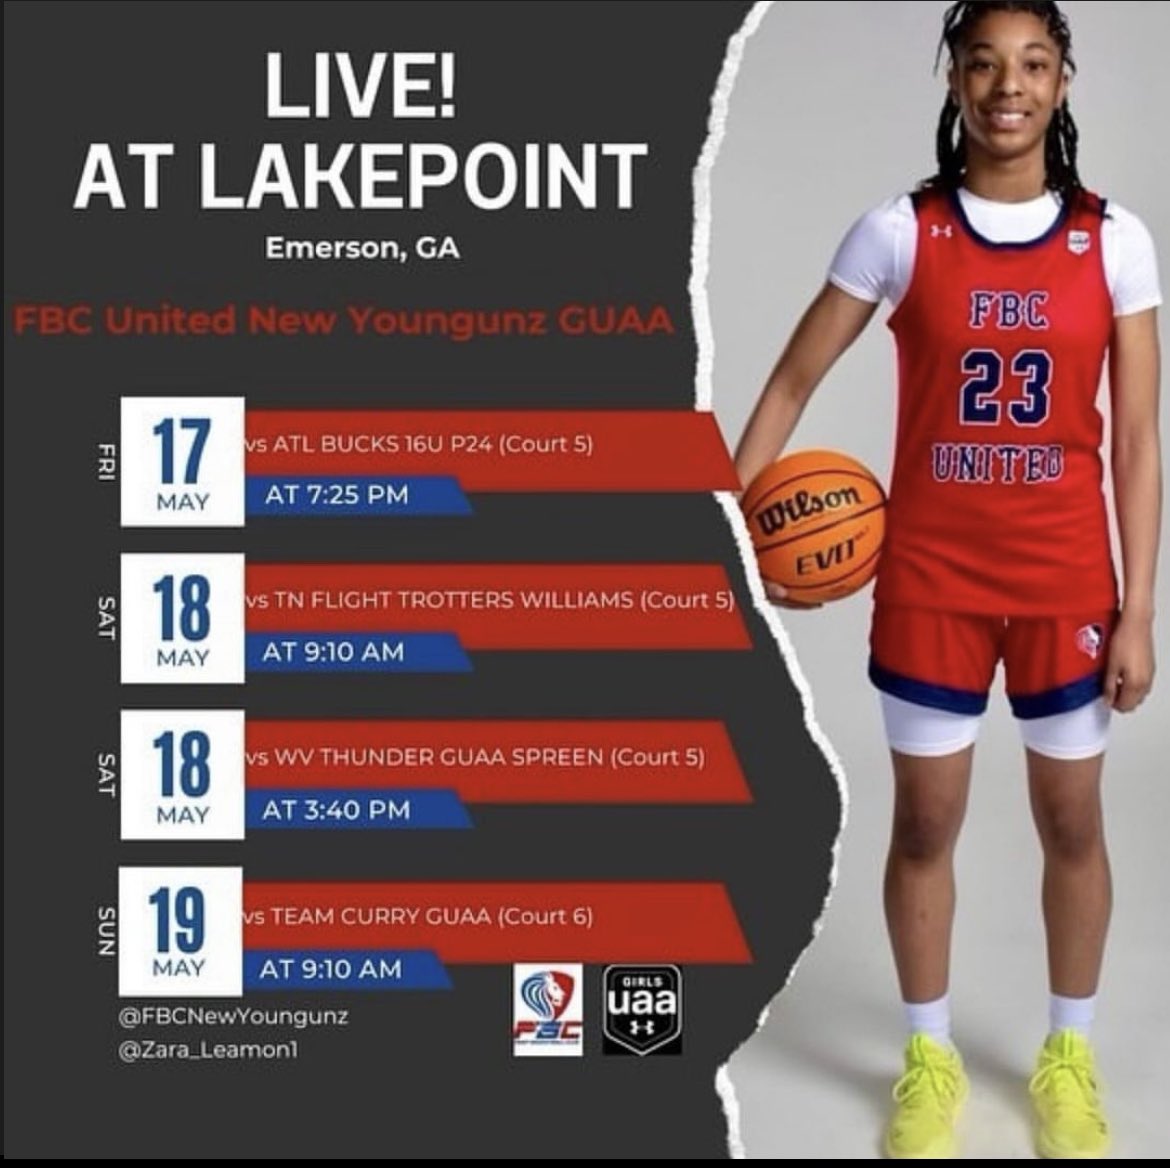 2026 CG @Zara_Leamon1 will be in the house at Live at Lakepoint! - great length, high motor, & down D, crafty scoring from all 3️⃣ Ivls.